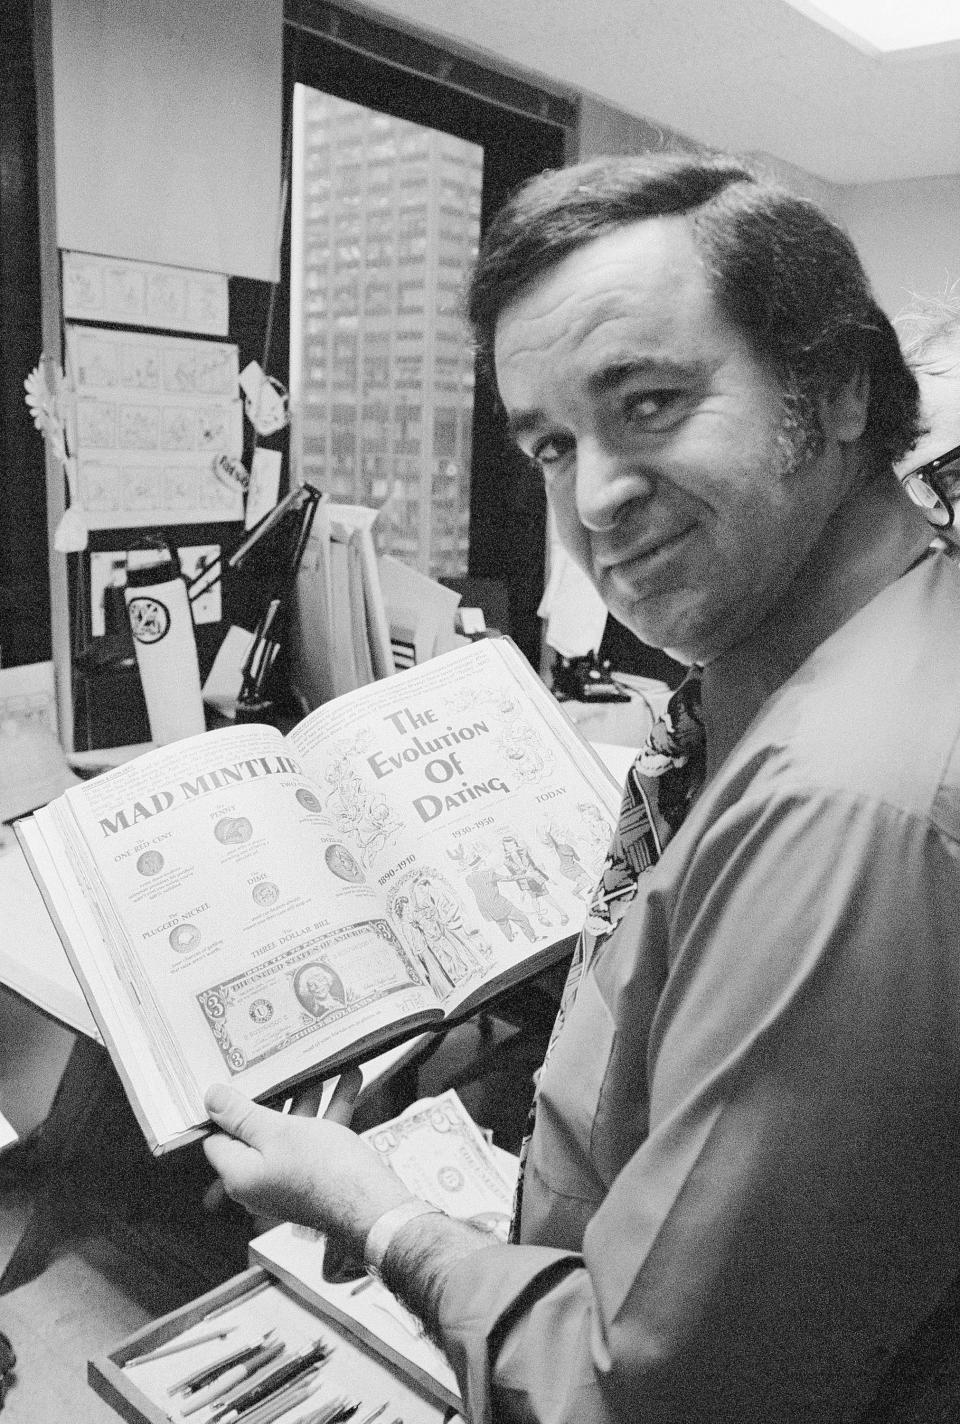 FILE - In this 1972 file photo, "Mad" magazine editor Al Feldstein works on page layout in his office at the magazine's New York headquarters. Feldstein, whose 28 years at the helm of Mad transformed the satirical magazine into a pop culture institution, died Tuesday, April 29, 2014. He was 88. (AP Photo/Jerry Mosey, File)